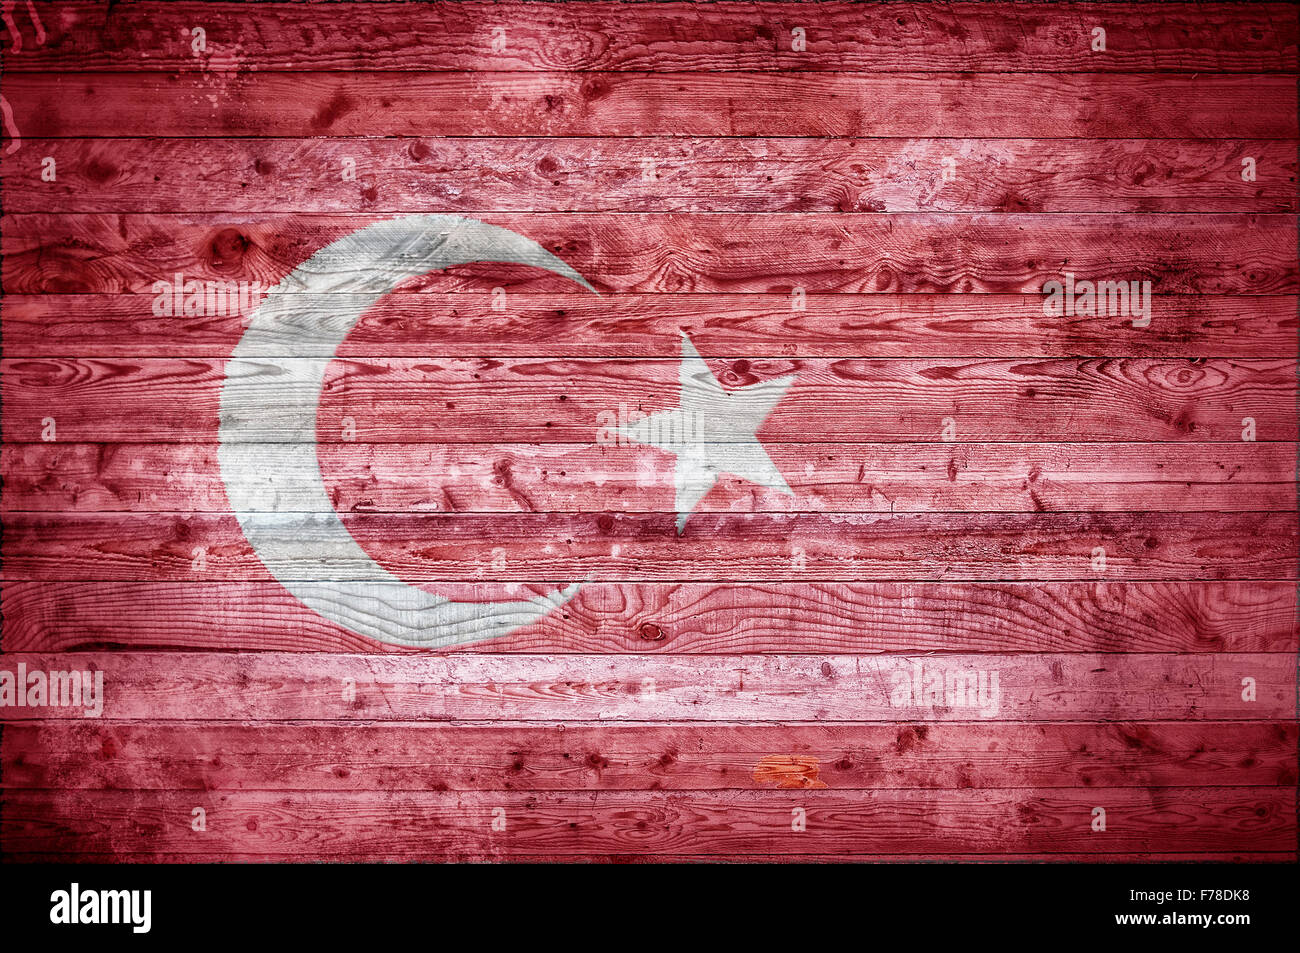 A vignetted background image of the flag of Turkey onto wooden boards of a wall or floor. Stock Photo